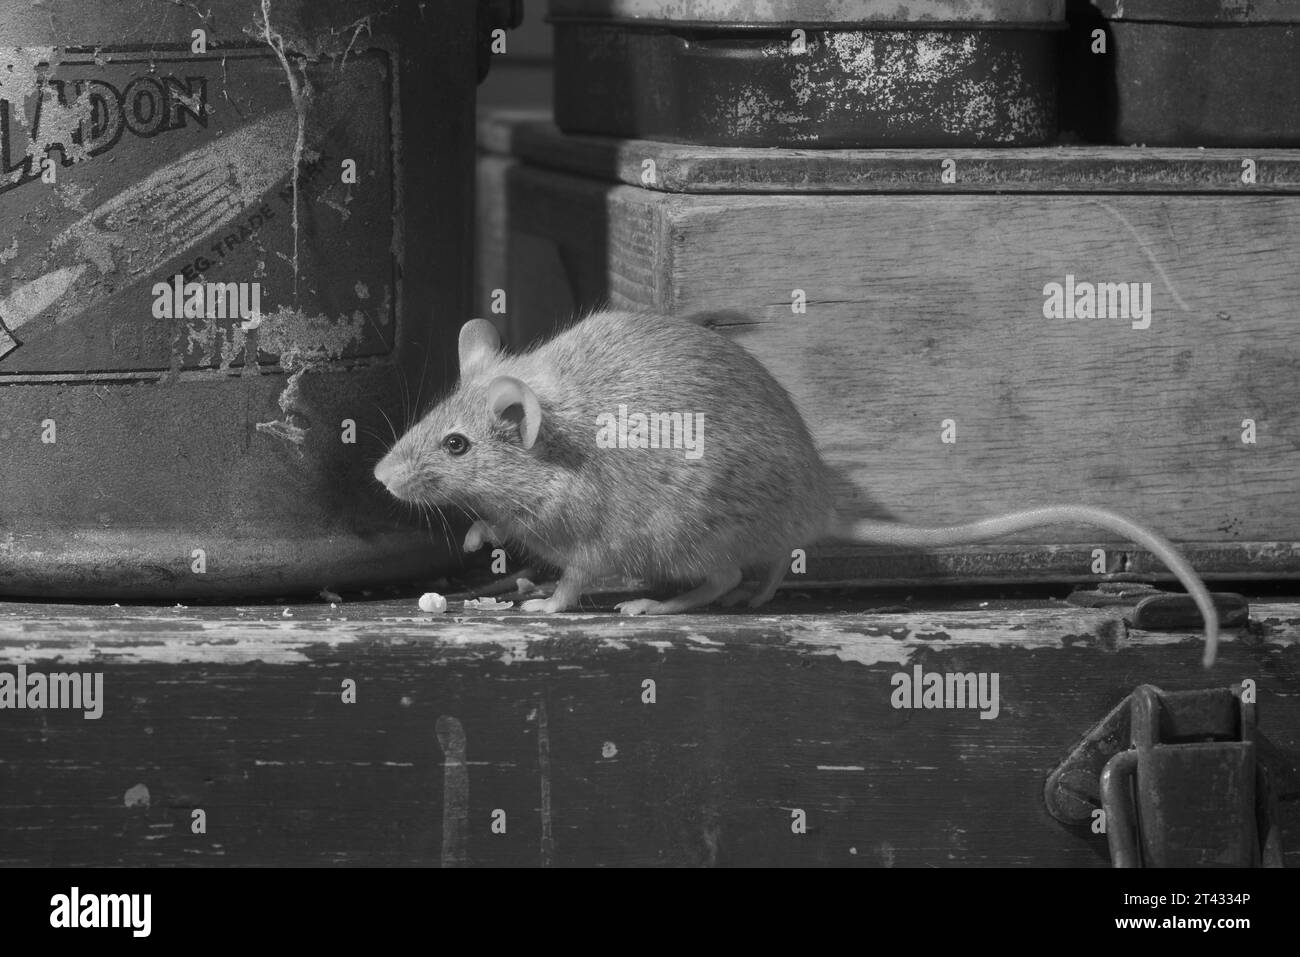 https://c8.alamy.com/comp/2T4334P/house-mouse-mus-musculus-greater-manchester-uk-2T4334P.jpg